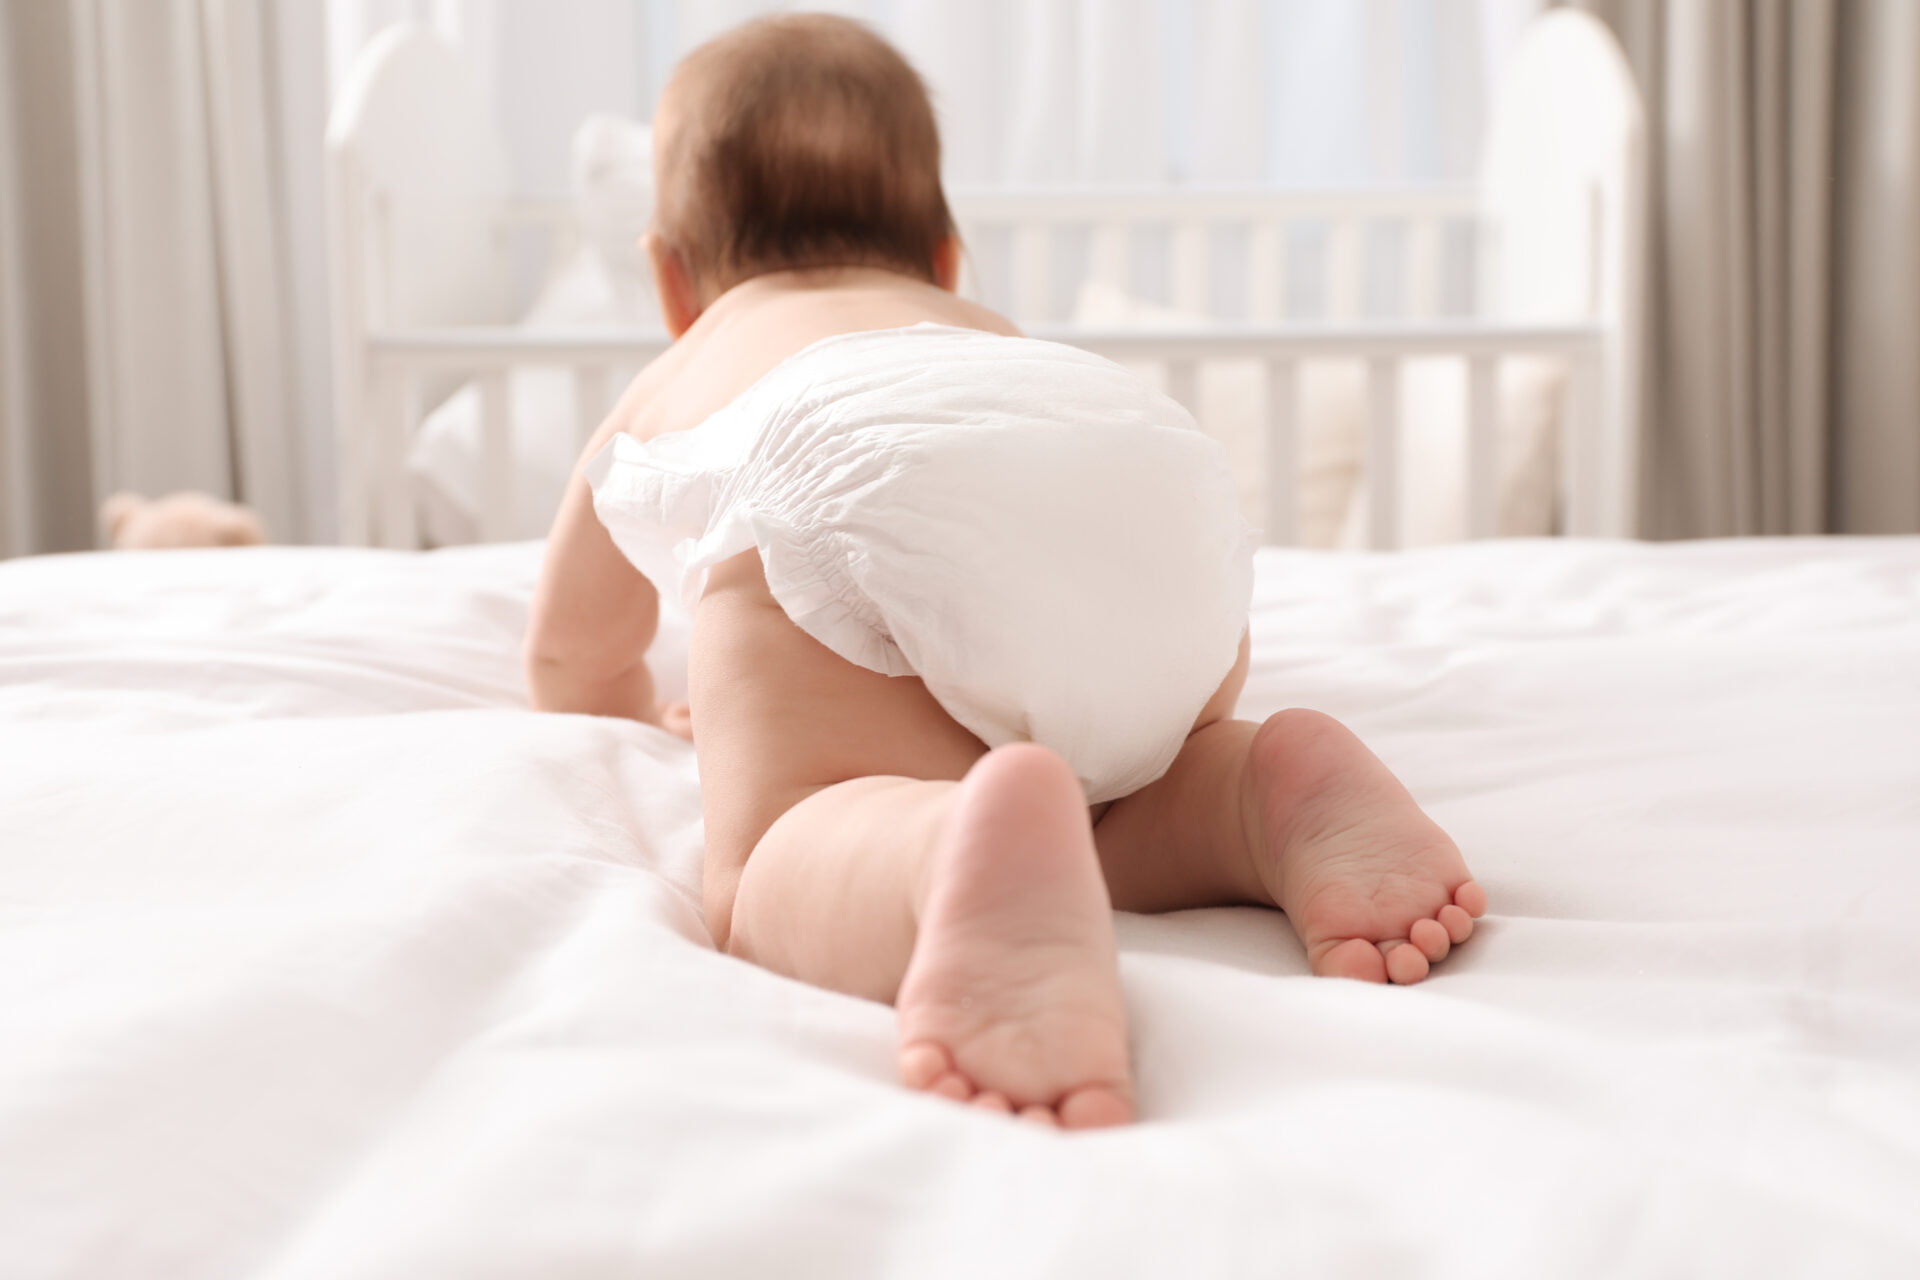 Do Parent's Choice Diapers Really Work? · Kids, Pregnancy & Baby